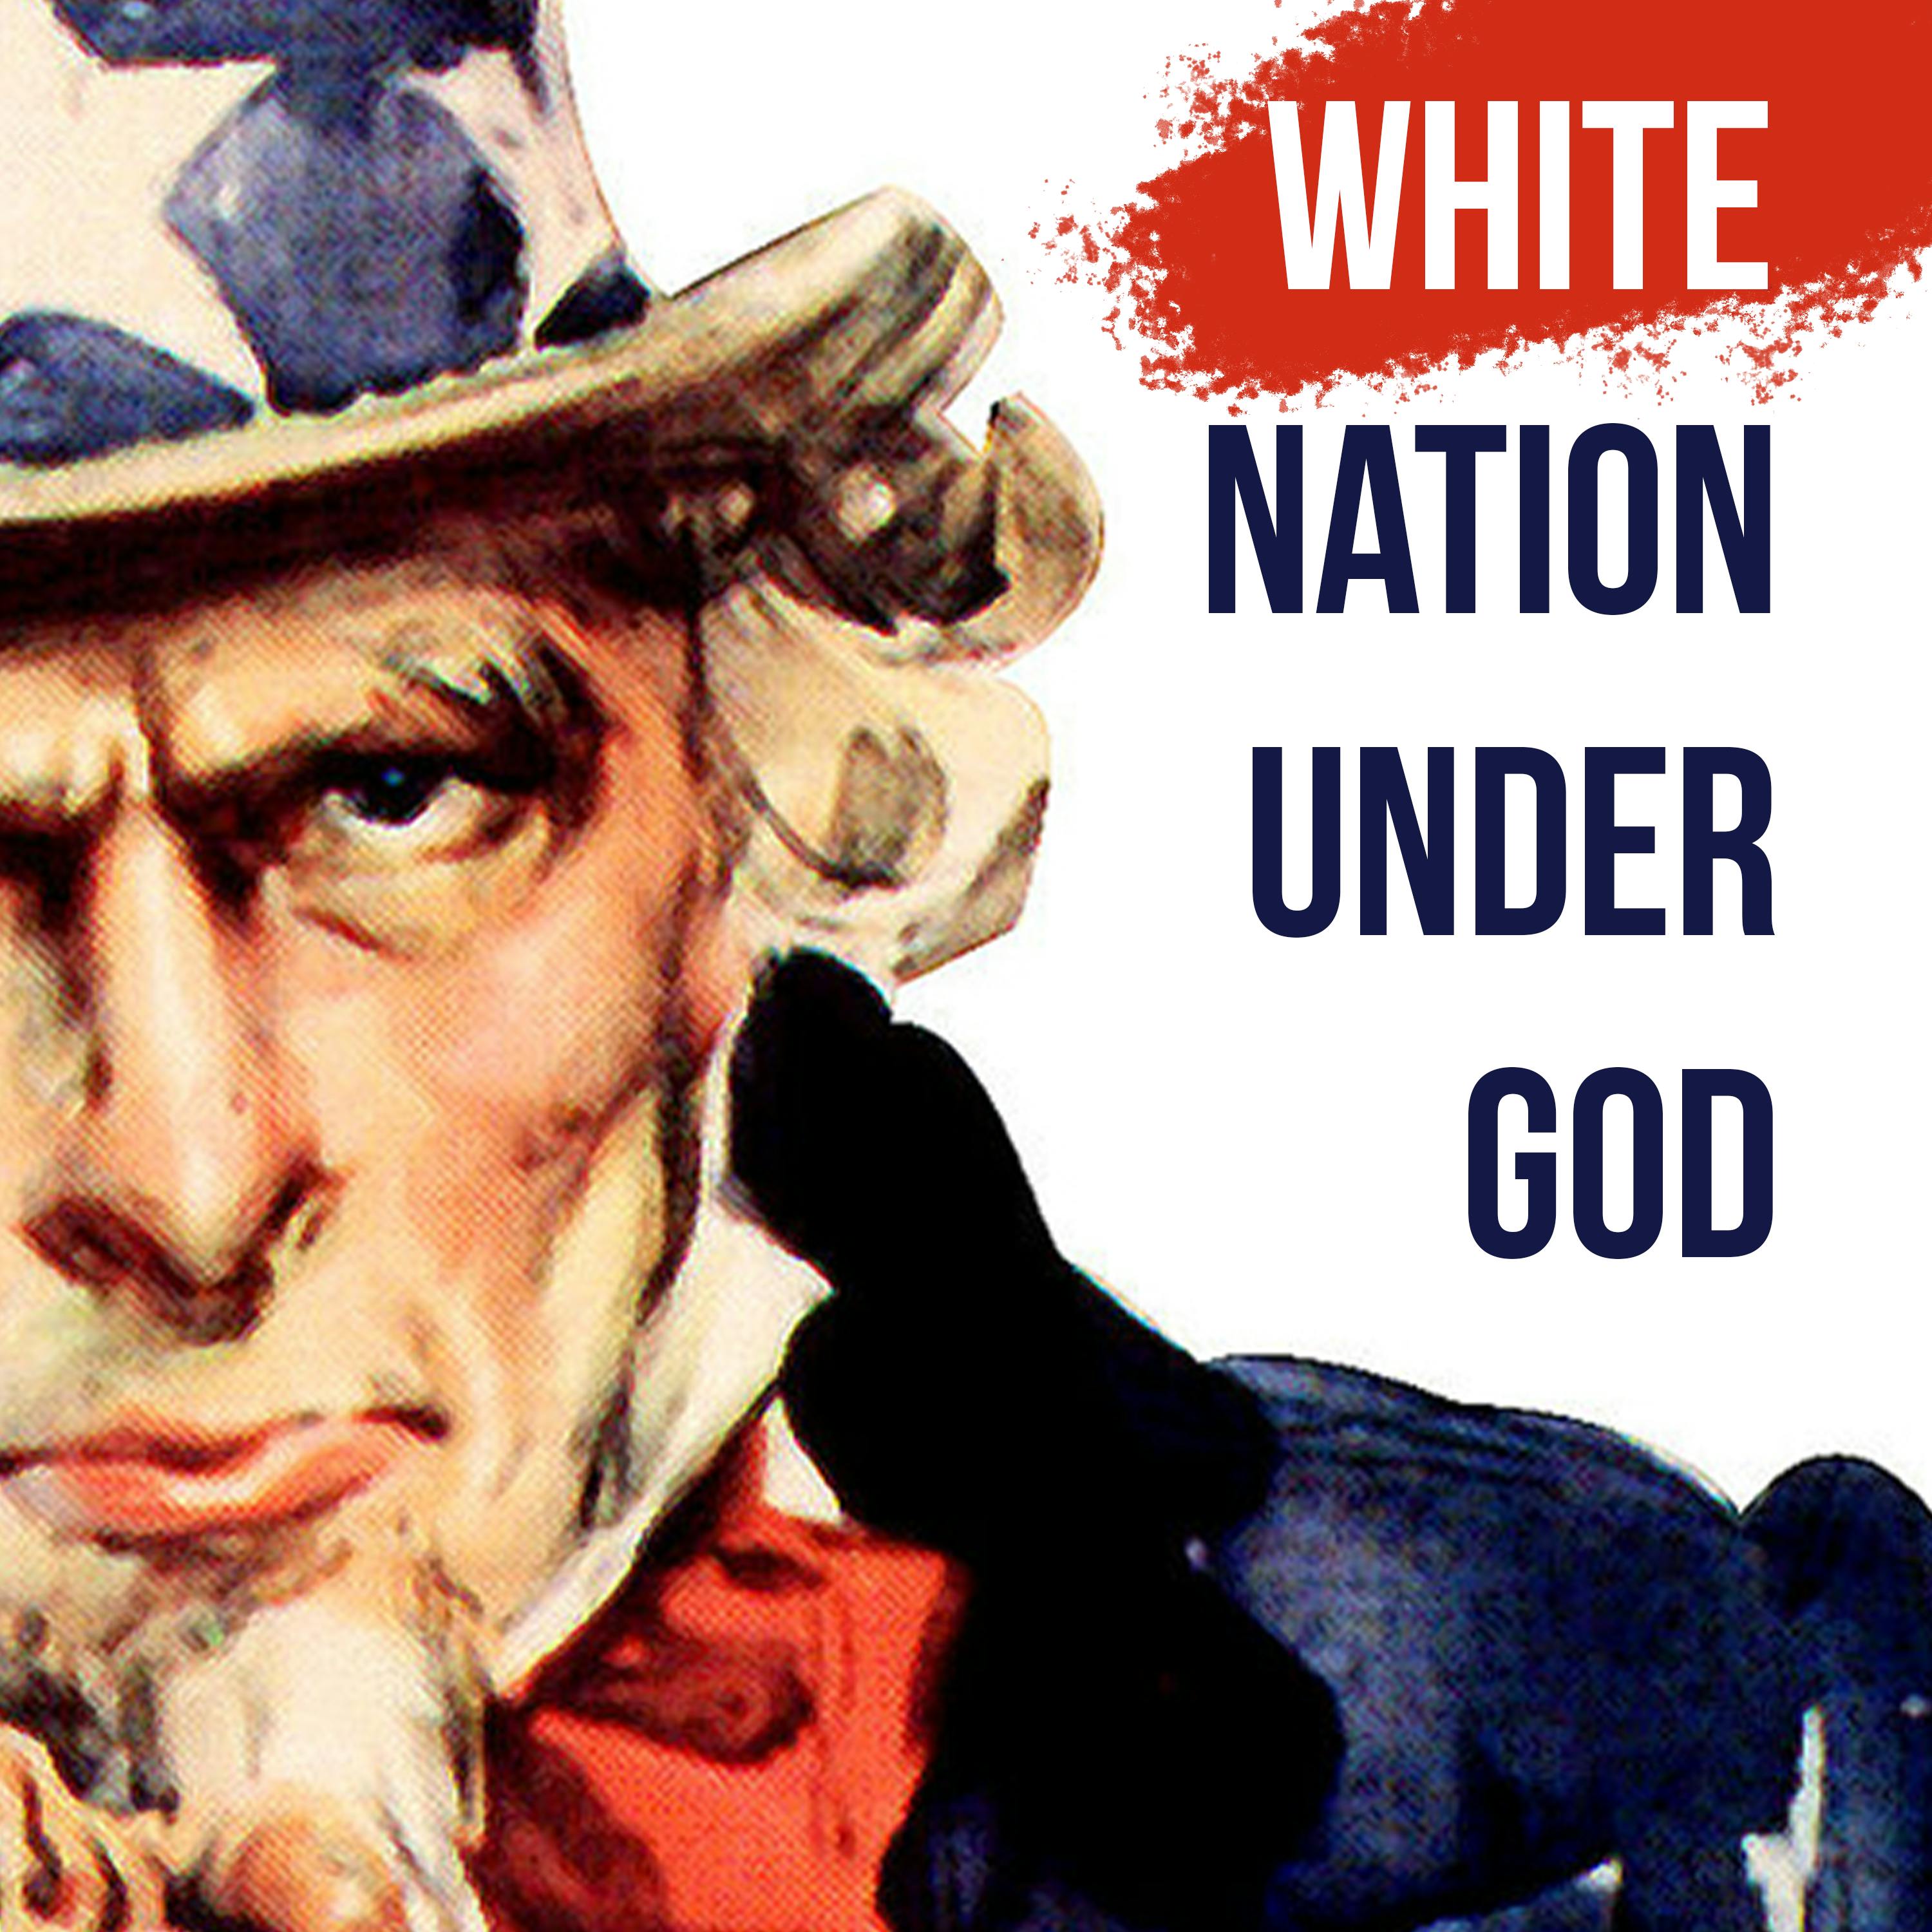 WNUG 02: How White Christian Nationalism Threatens Democracy with Dr. Philip Gorski and Dr. Samuel Perry